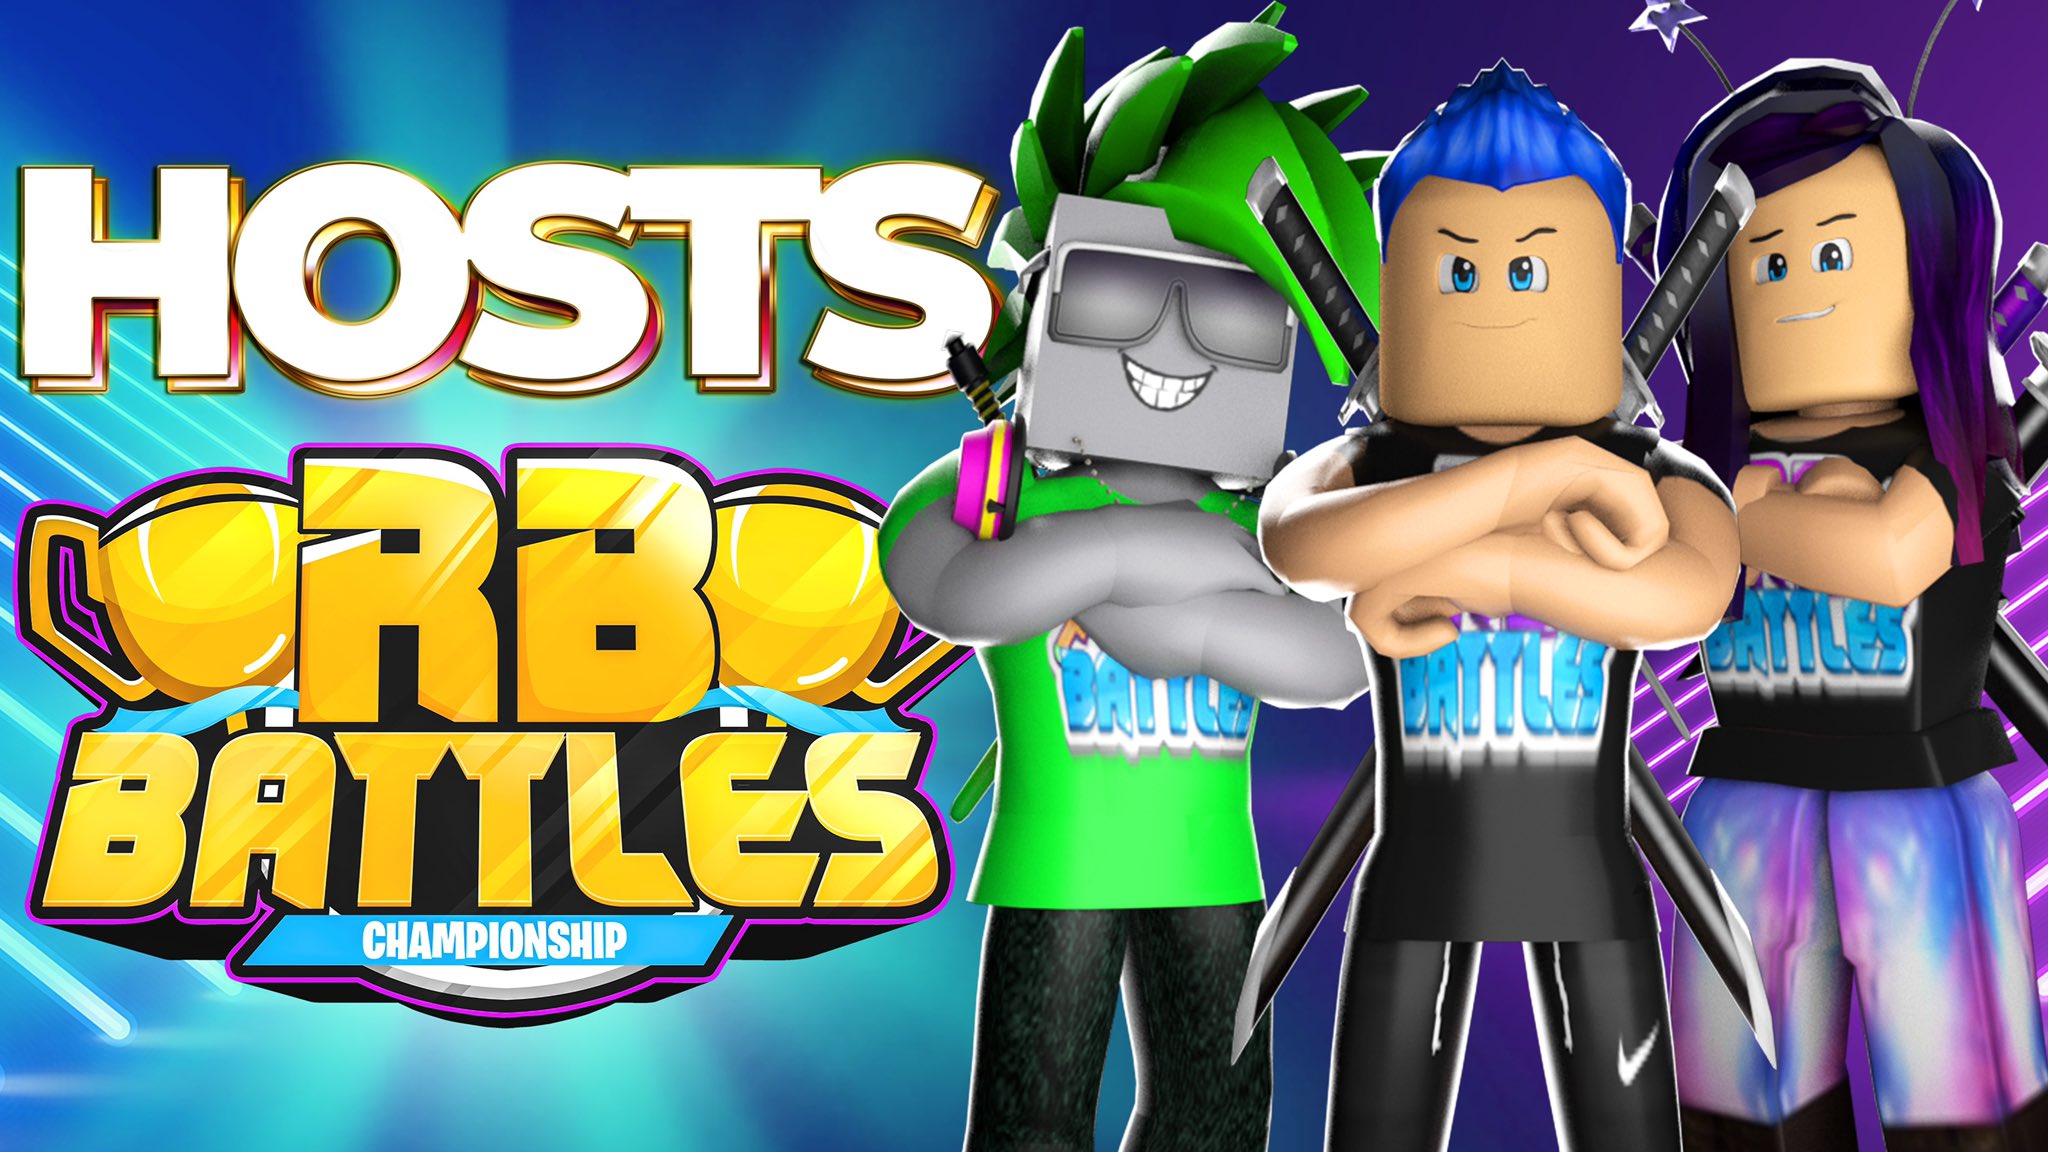 Roblox Battles On Twitter Introducing Your Hosts Djmonopoli Russotalks Sabrinabrite The Action Begins Tomorrow Make Sure You Re Subscribed To The Rb Battles Youtube Channel To See - roblox rb battles twitter